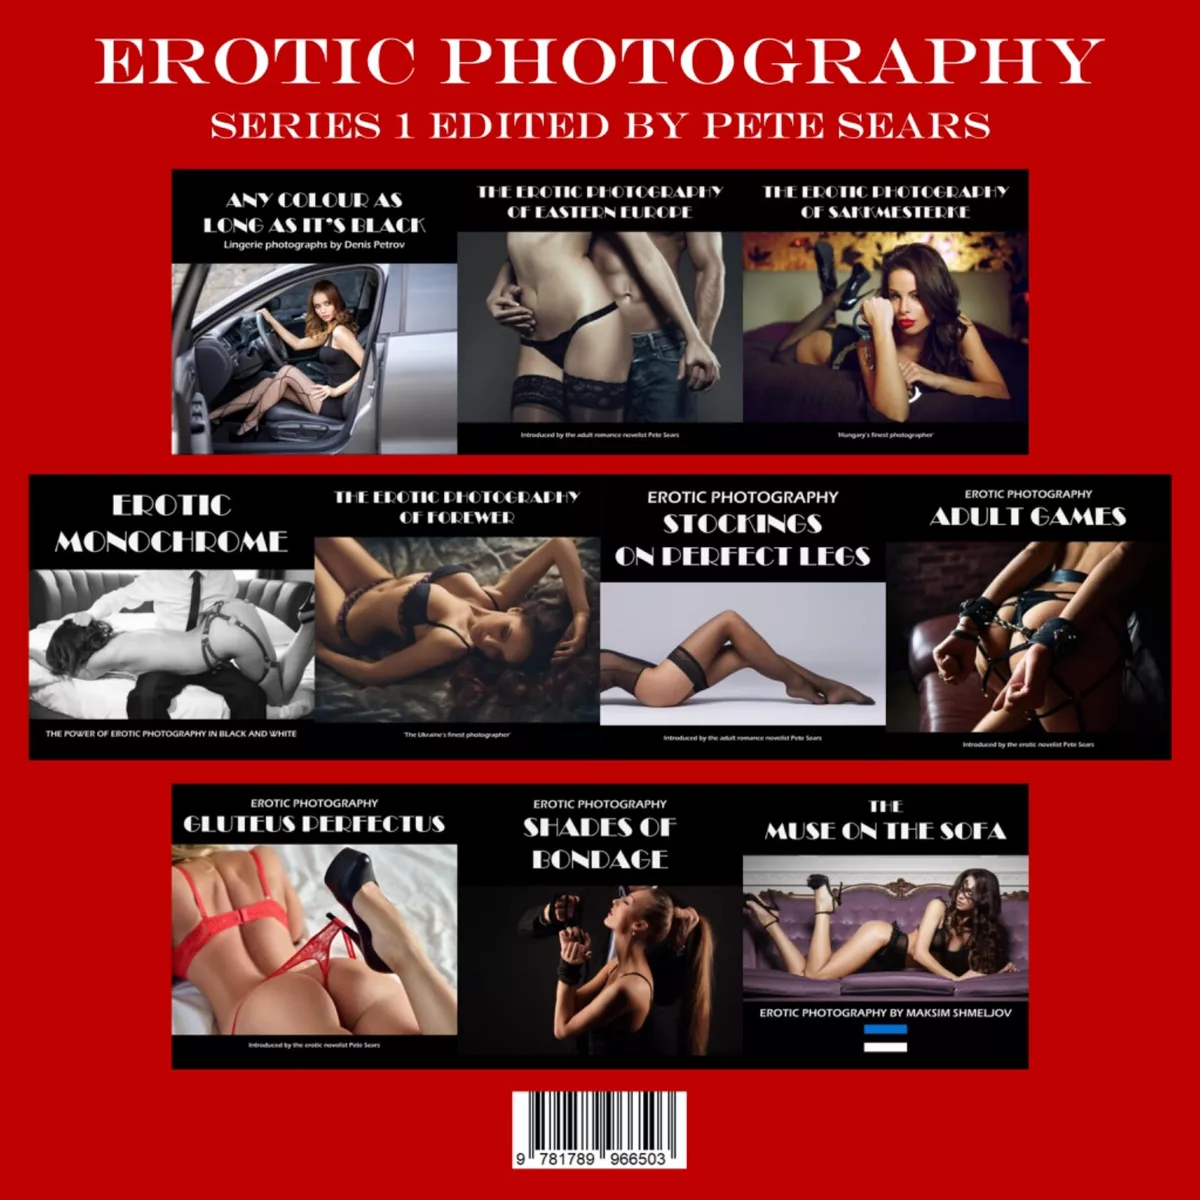 Best of Adult erotic photography